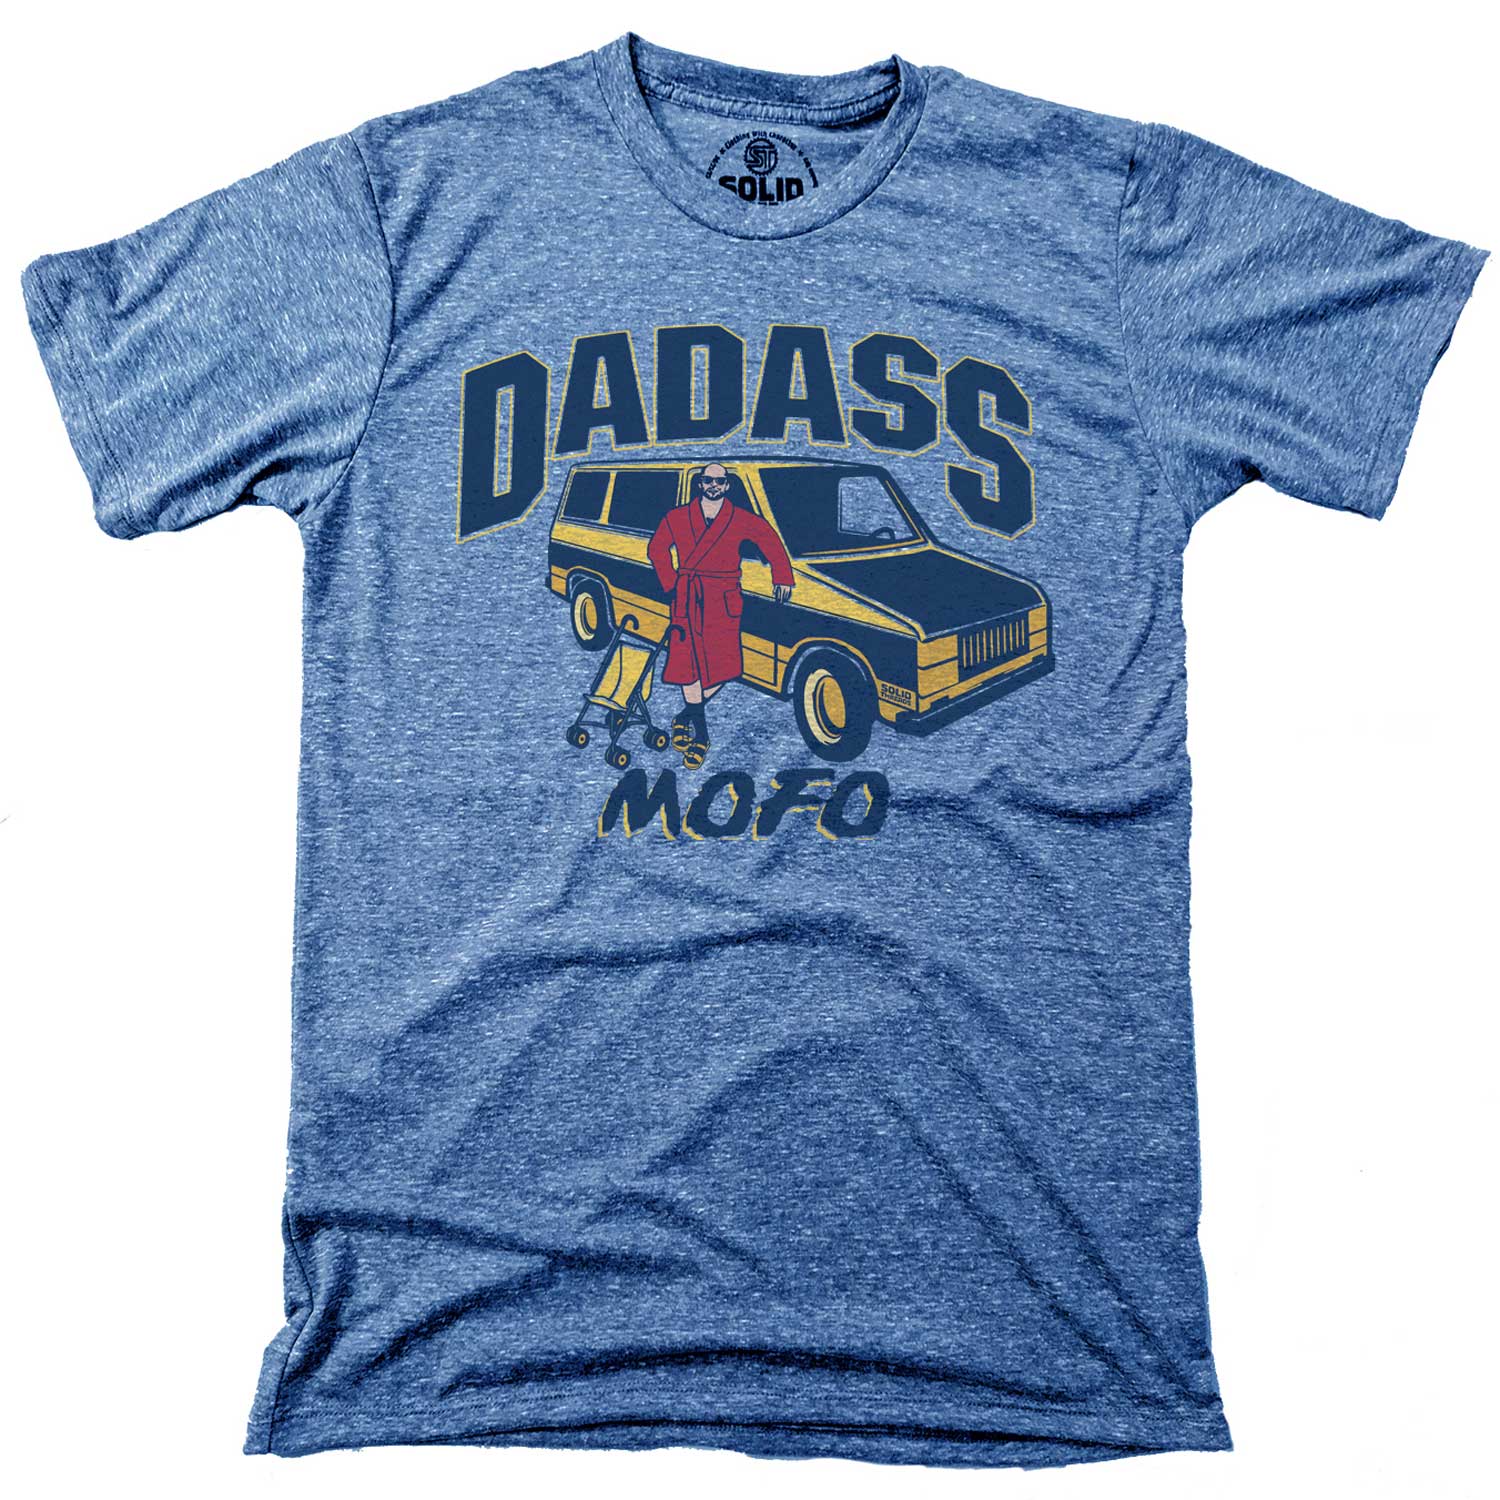 Men's Dadass Father's Day Vintage Graphic Tee | Funny Parenting New Dad T-shirt | SOLID THREADS